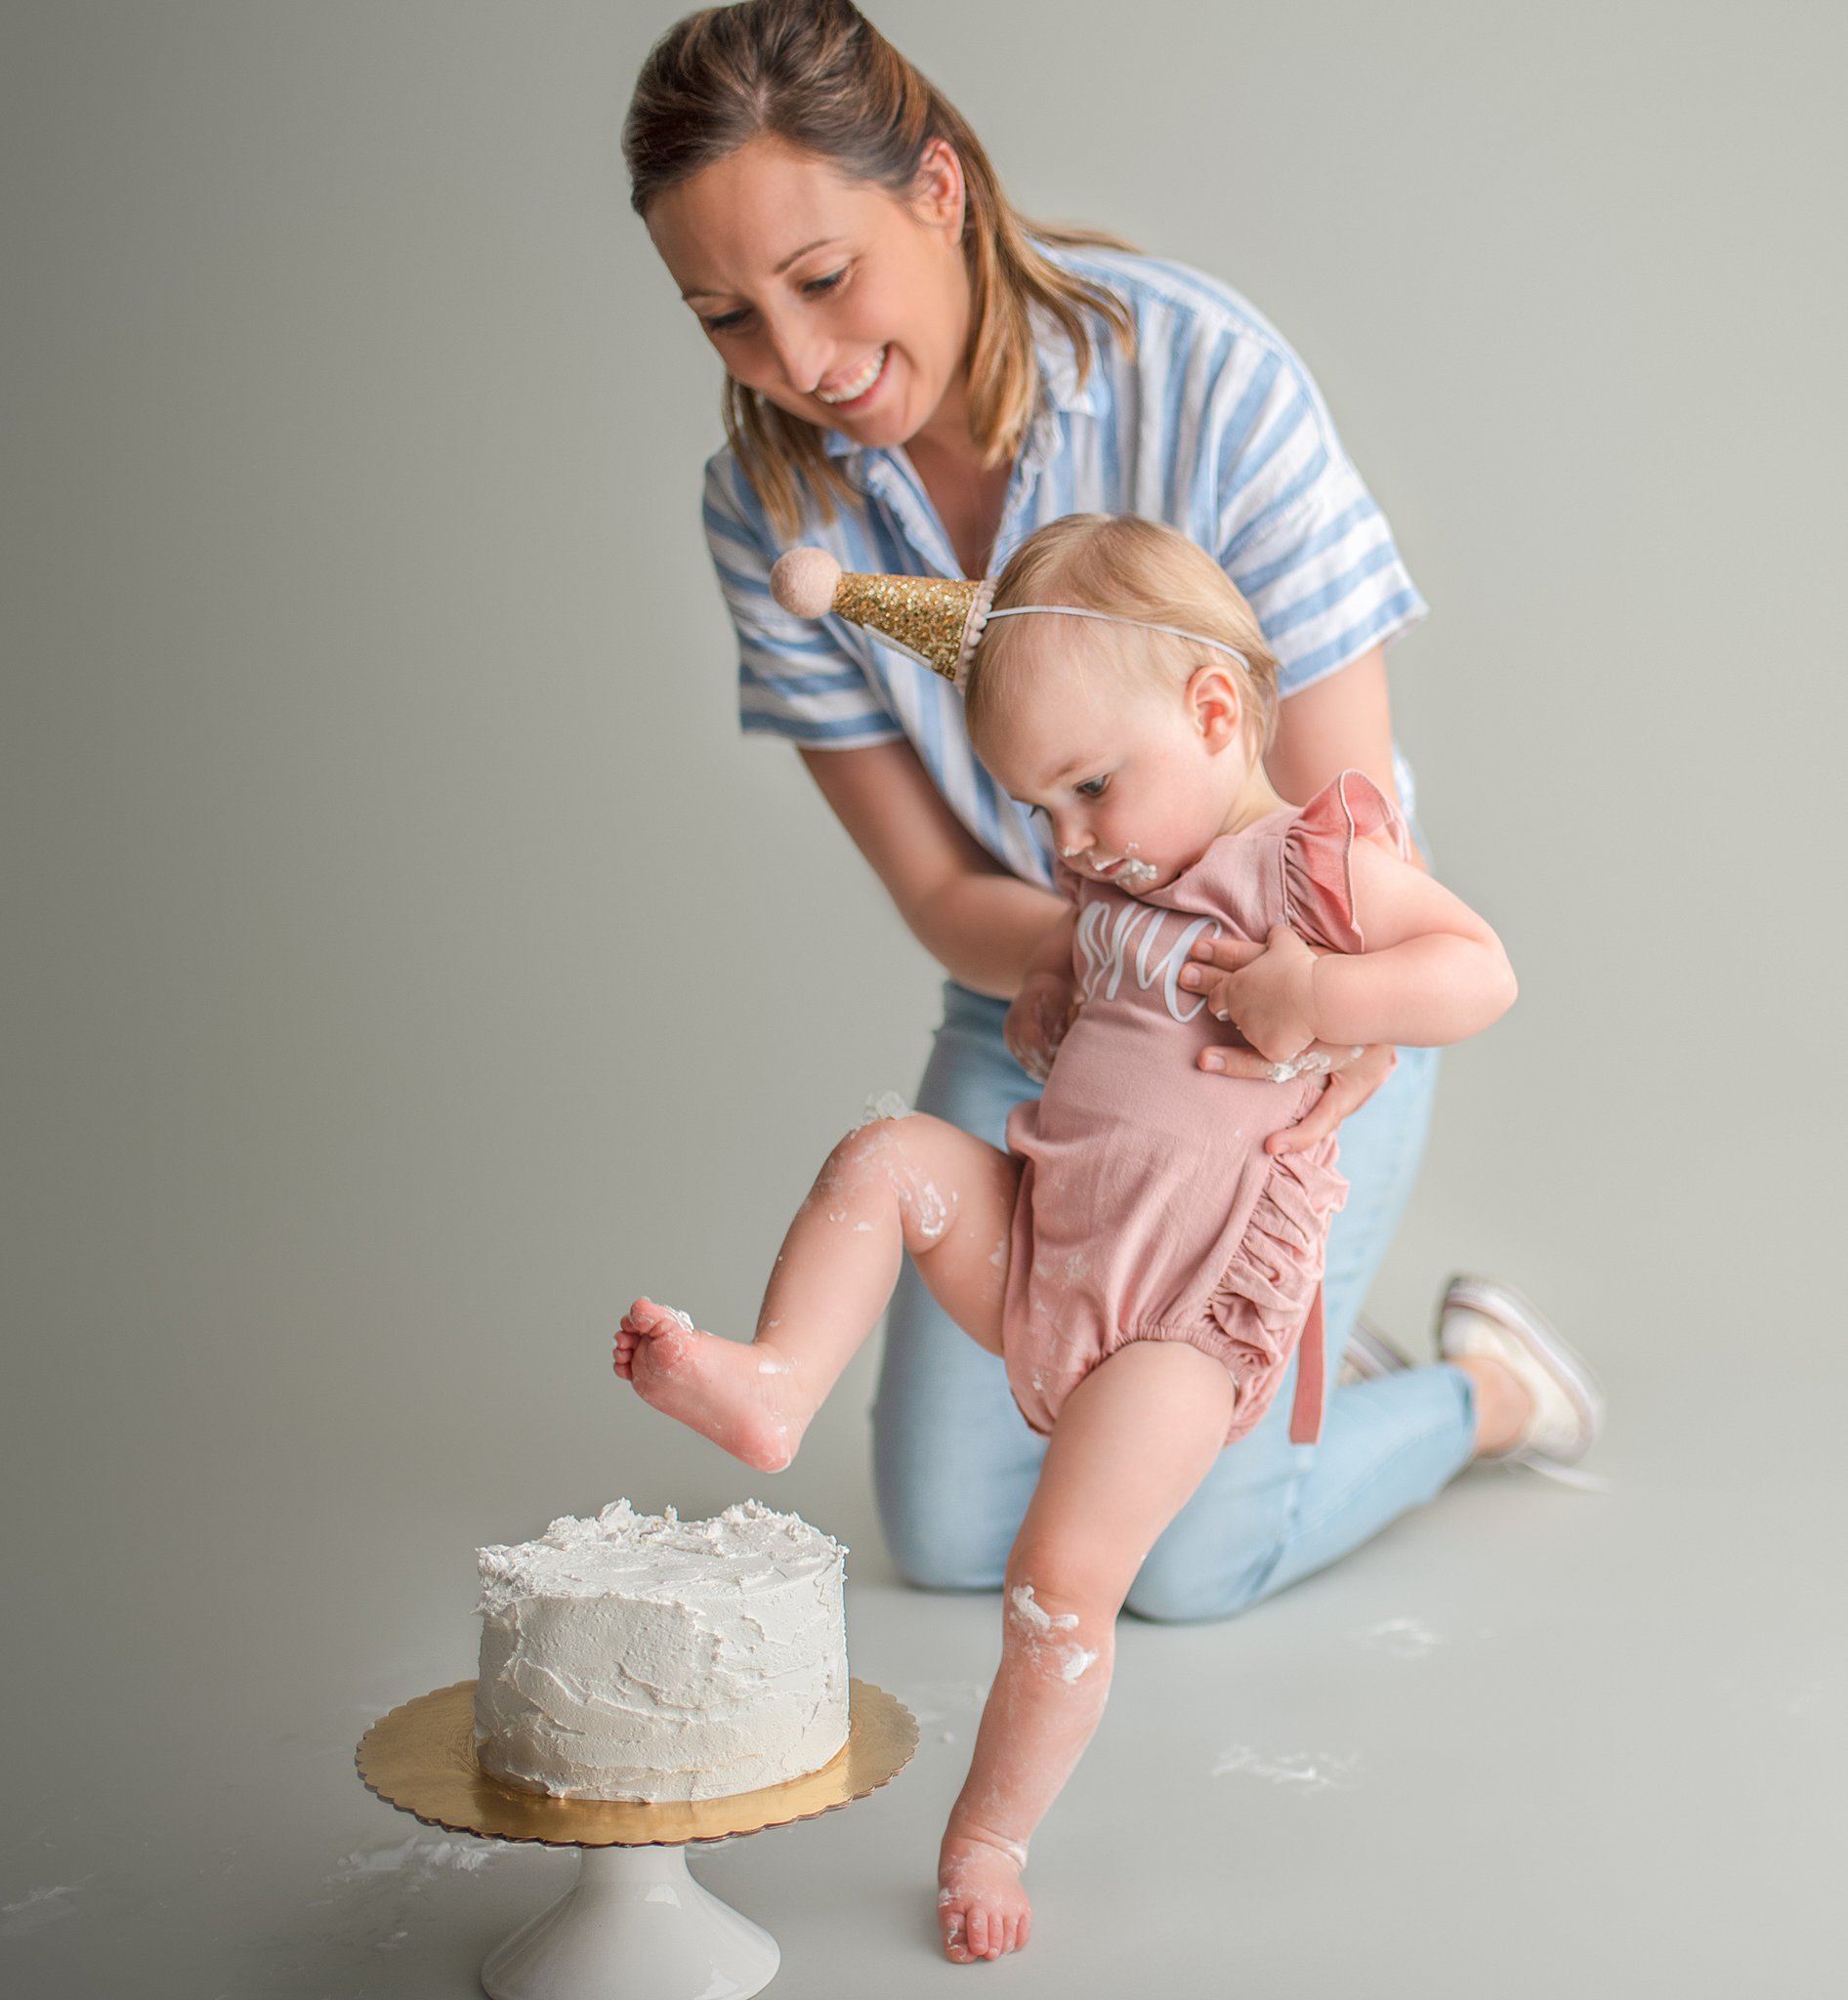 A mother holds her daughter up so she can kick her first birthday cake in a studio just between friends st charles